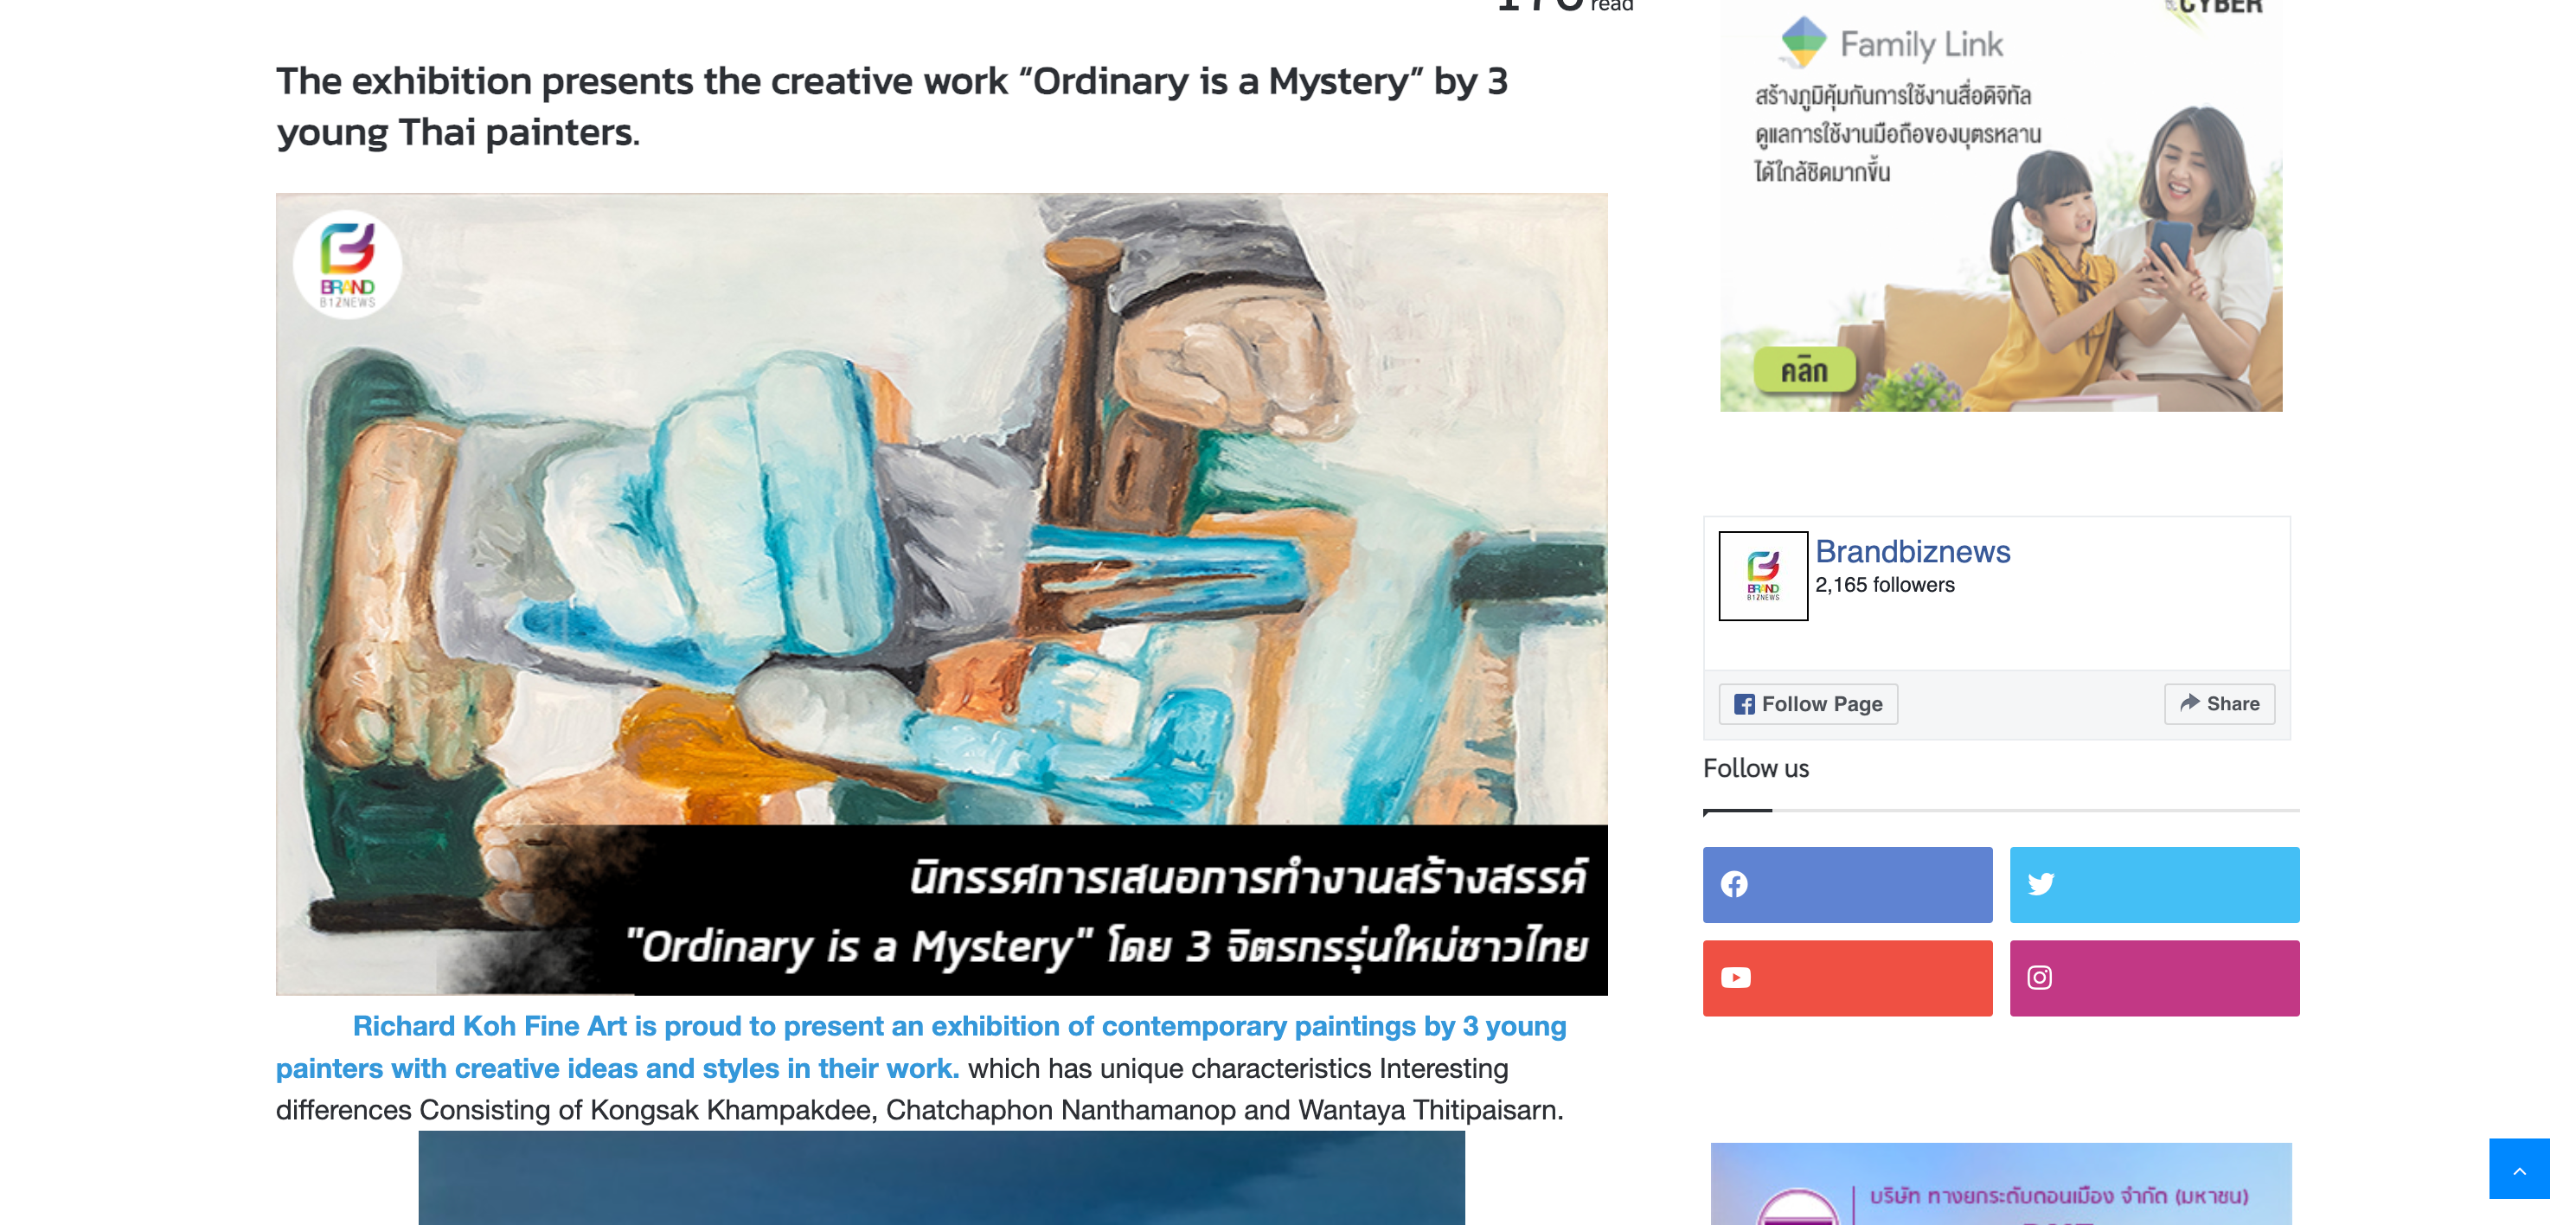 Brand Biz News – The exhibition presents the creative work “Ordinary is a Mystery” by 3 young Thai painters